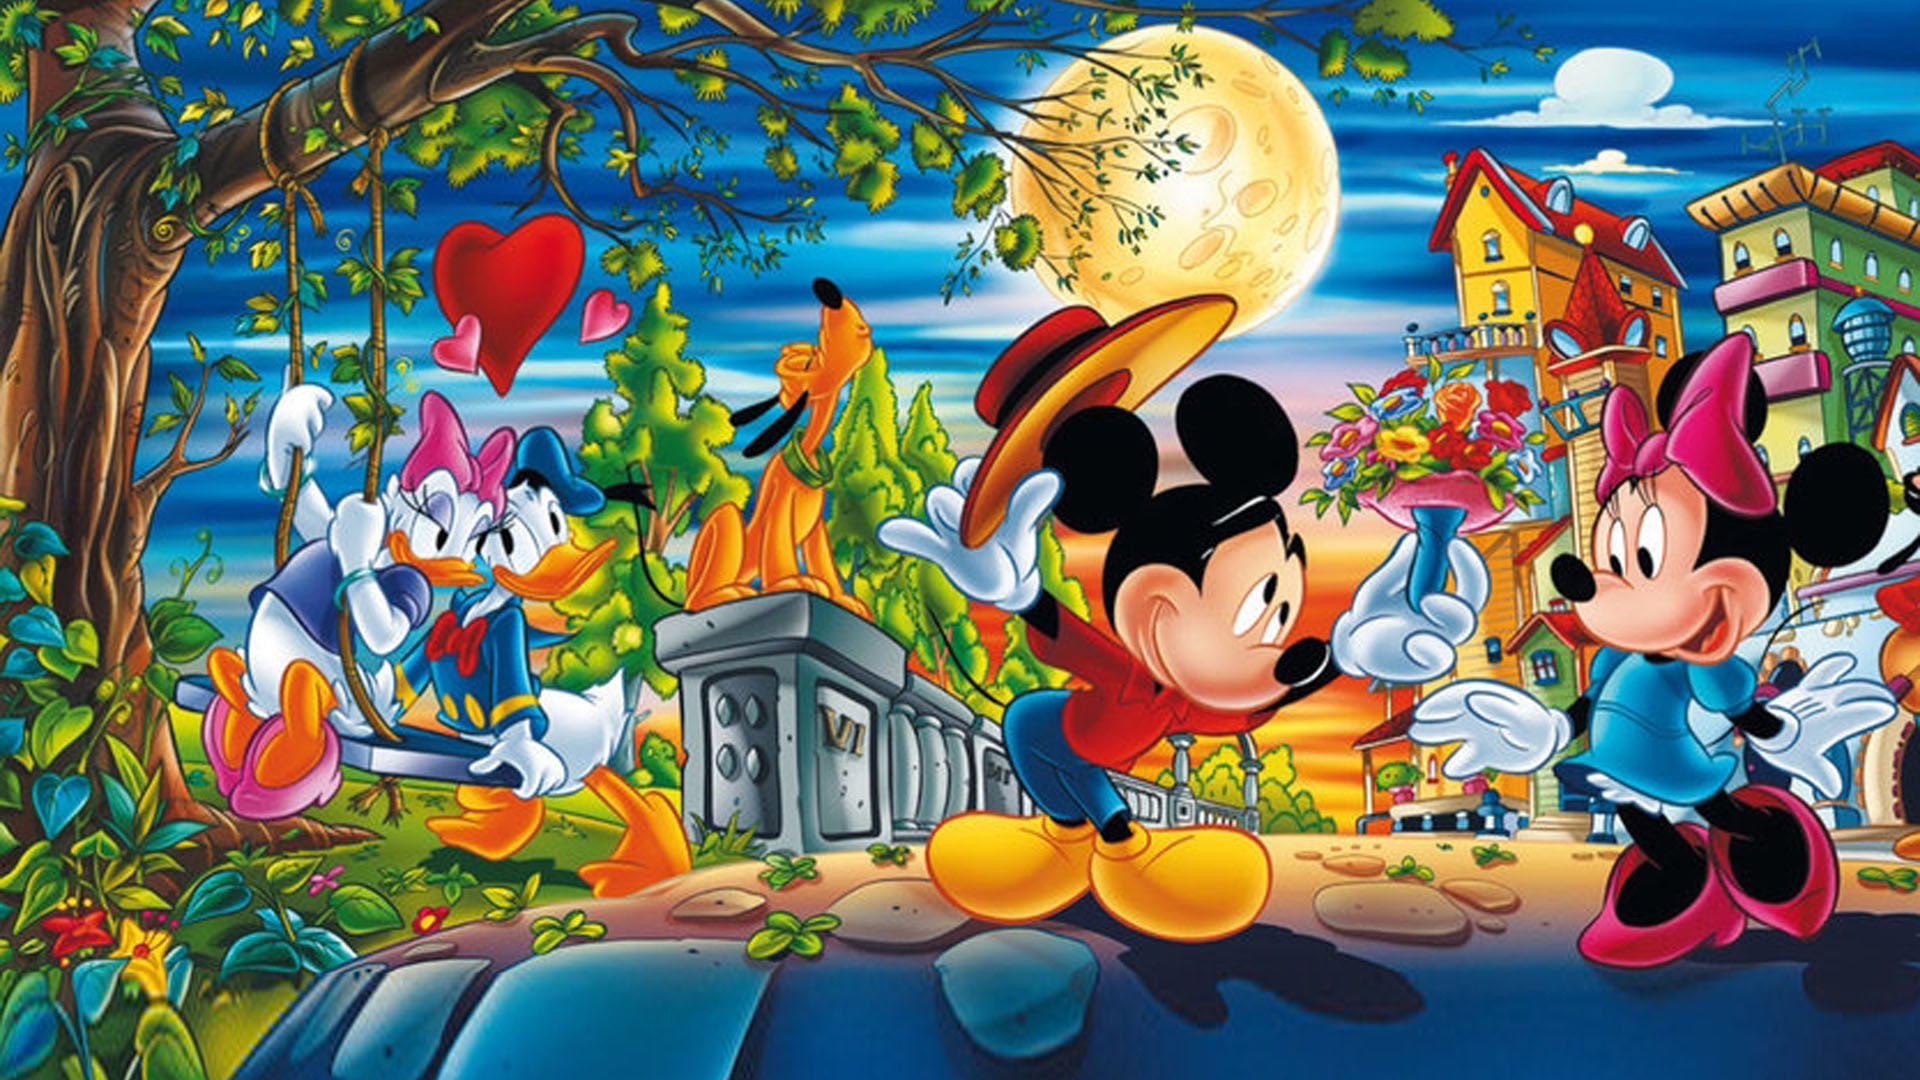 Valentine Day Cartoons Mickey With Minnie Mouse And Donald With Daisy Duck Disney Pictures Love Couple Wallpaper Hd 1920×1080